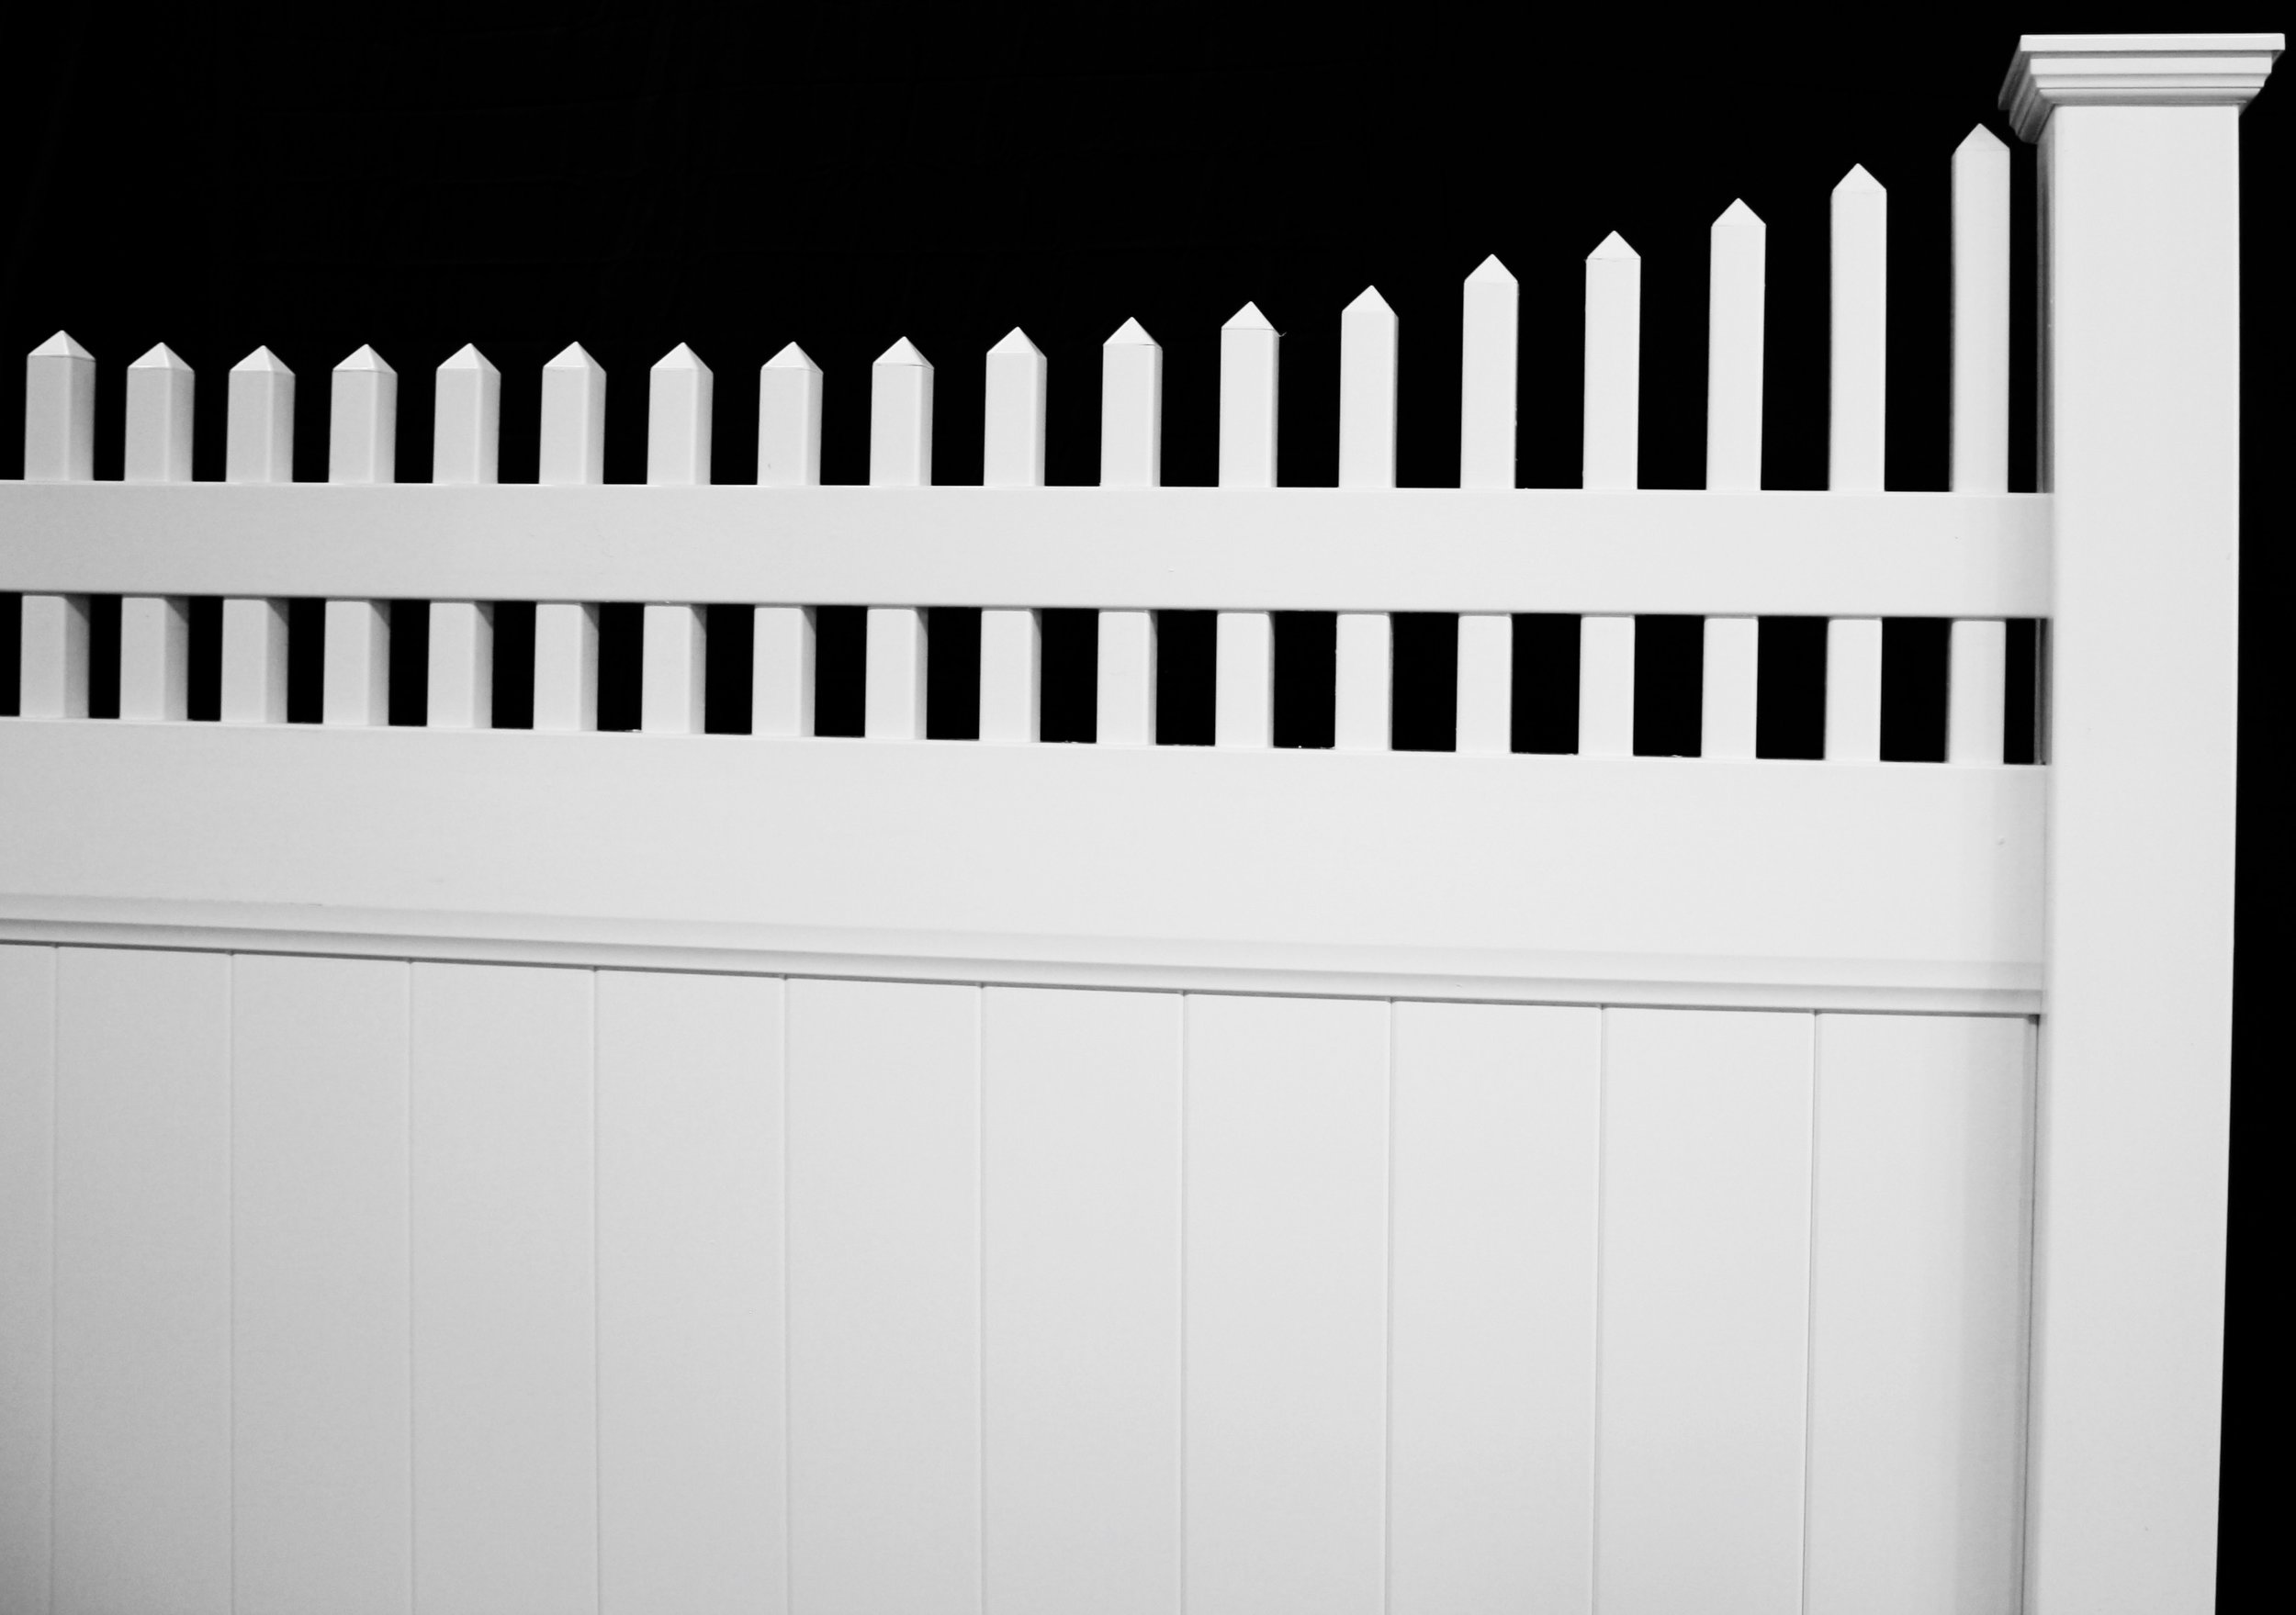 Privacy Fence In Greenville